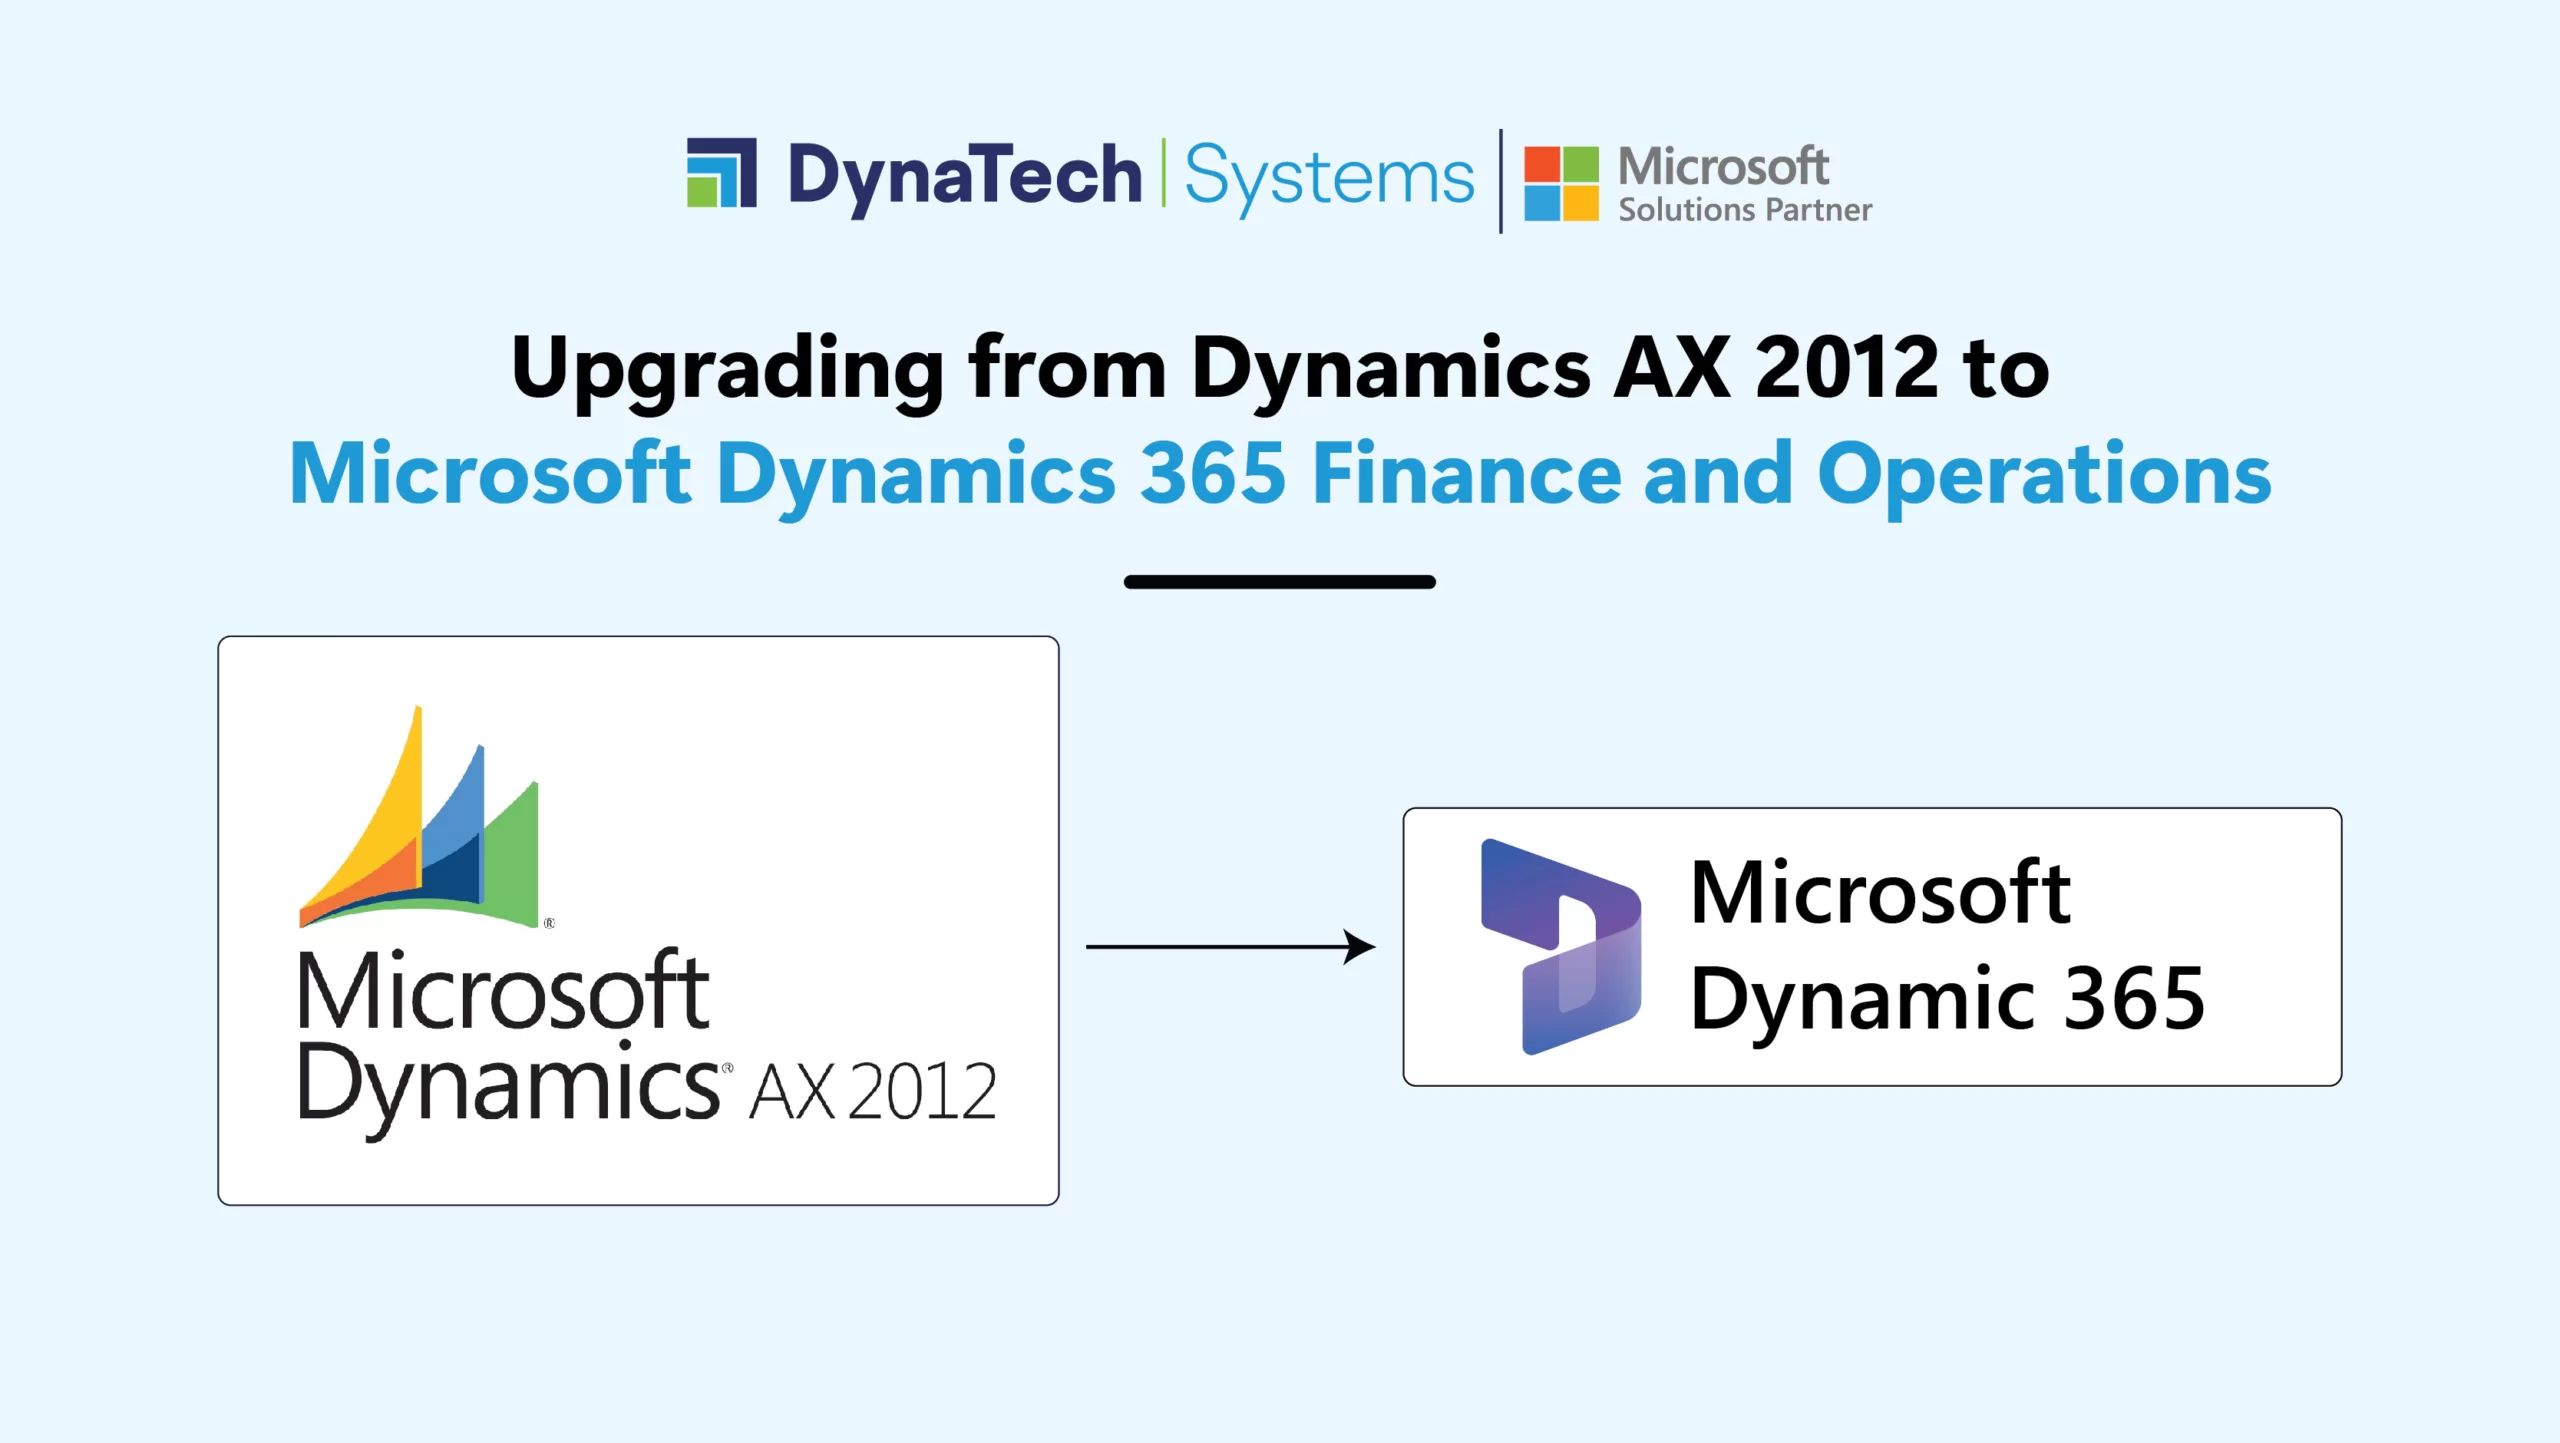 AX 2012 Upgrade to Dynamics 365: Detailed End-to-end Process